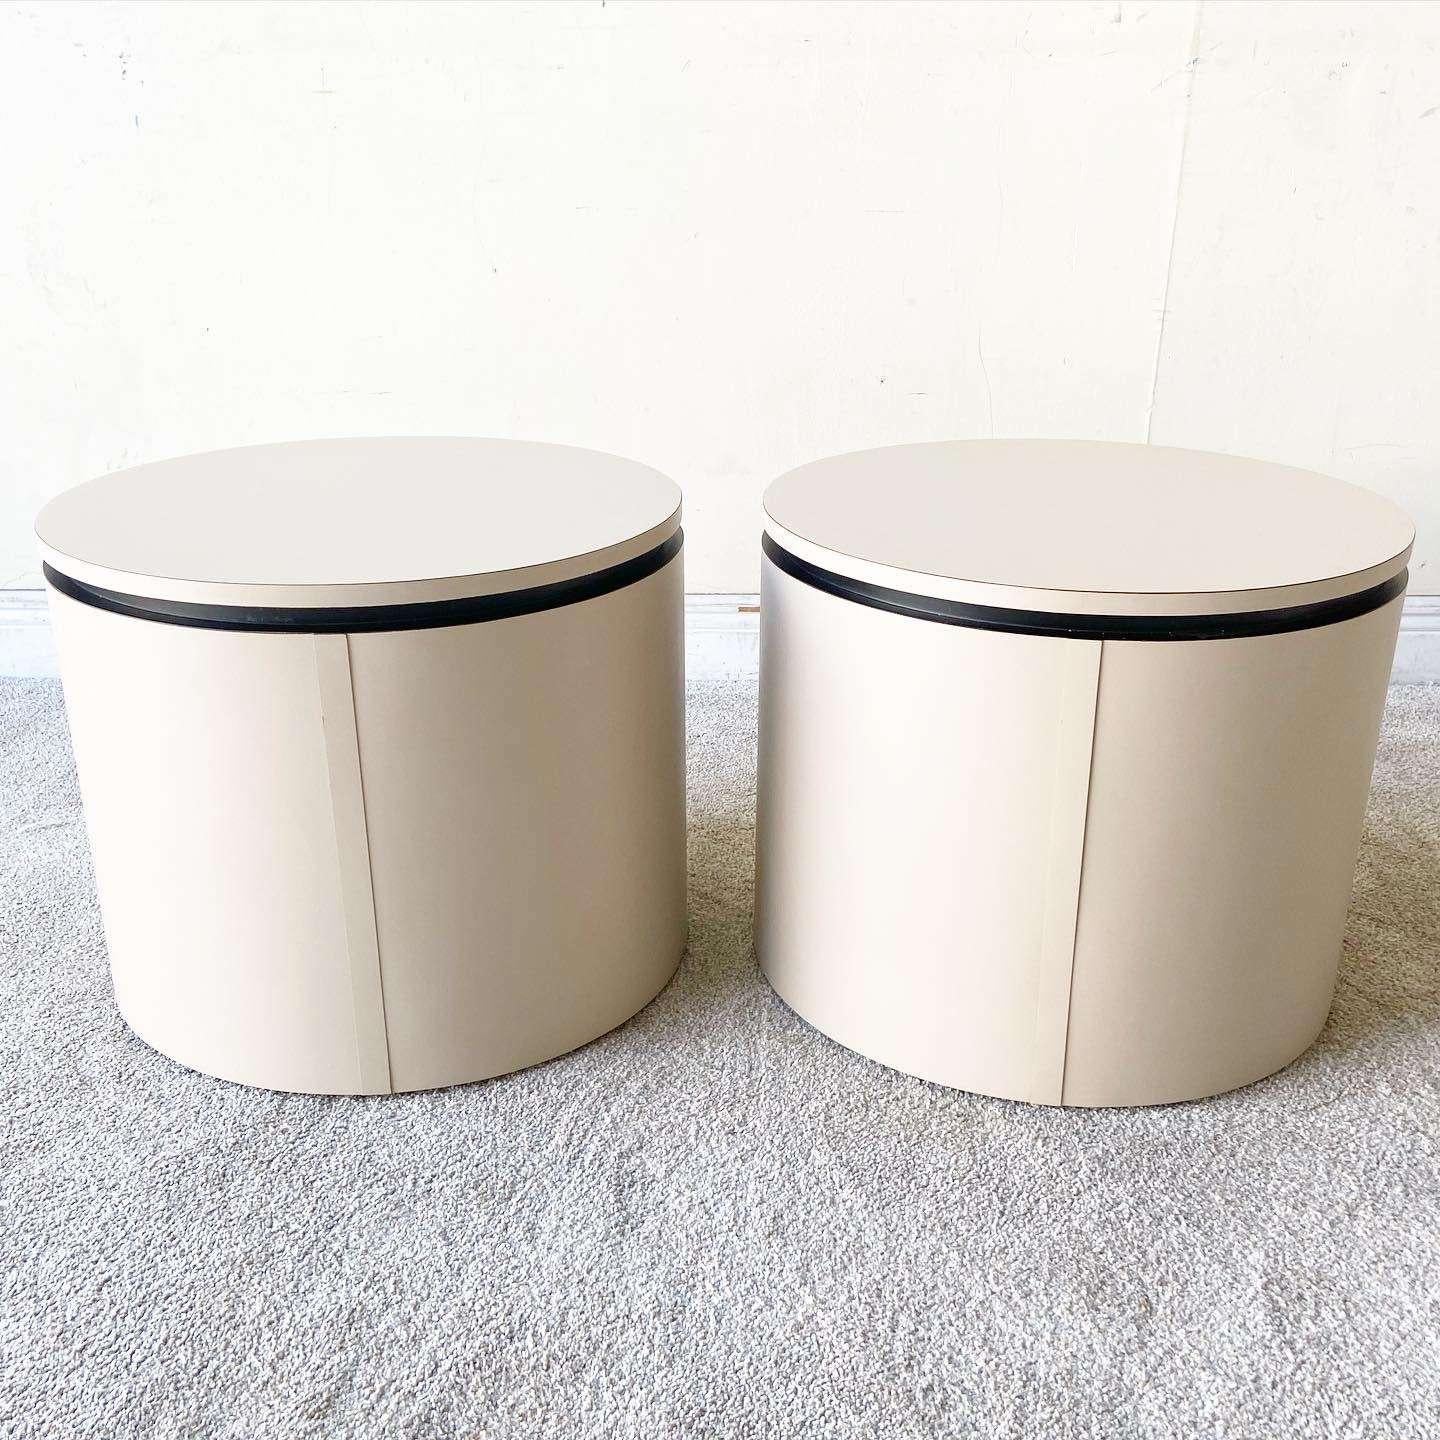 American Postmodern Tan & Black Lacquer Laminate Circular Side Tables on Casters - a Pair For Sale